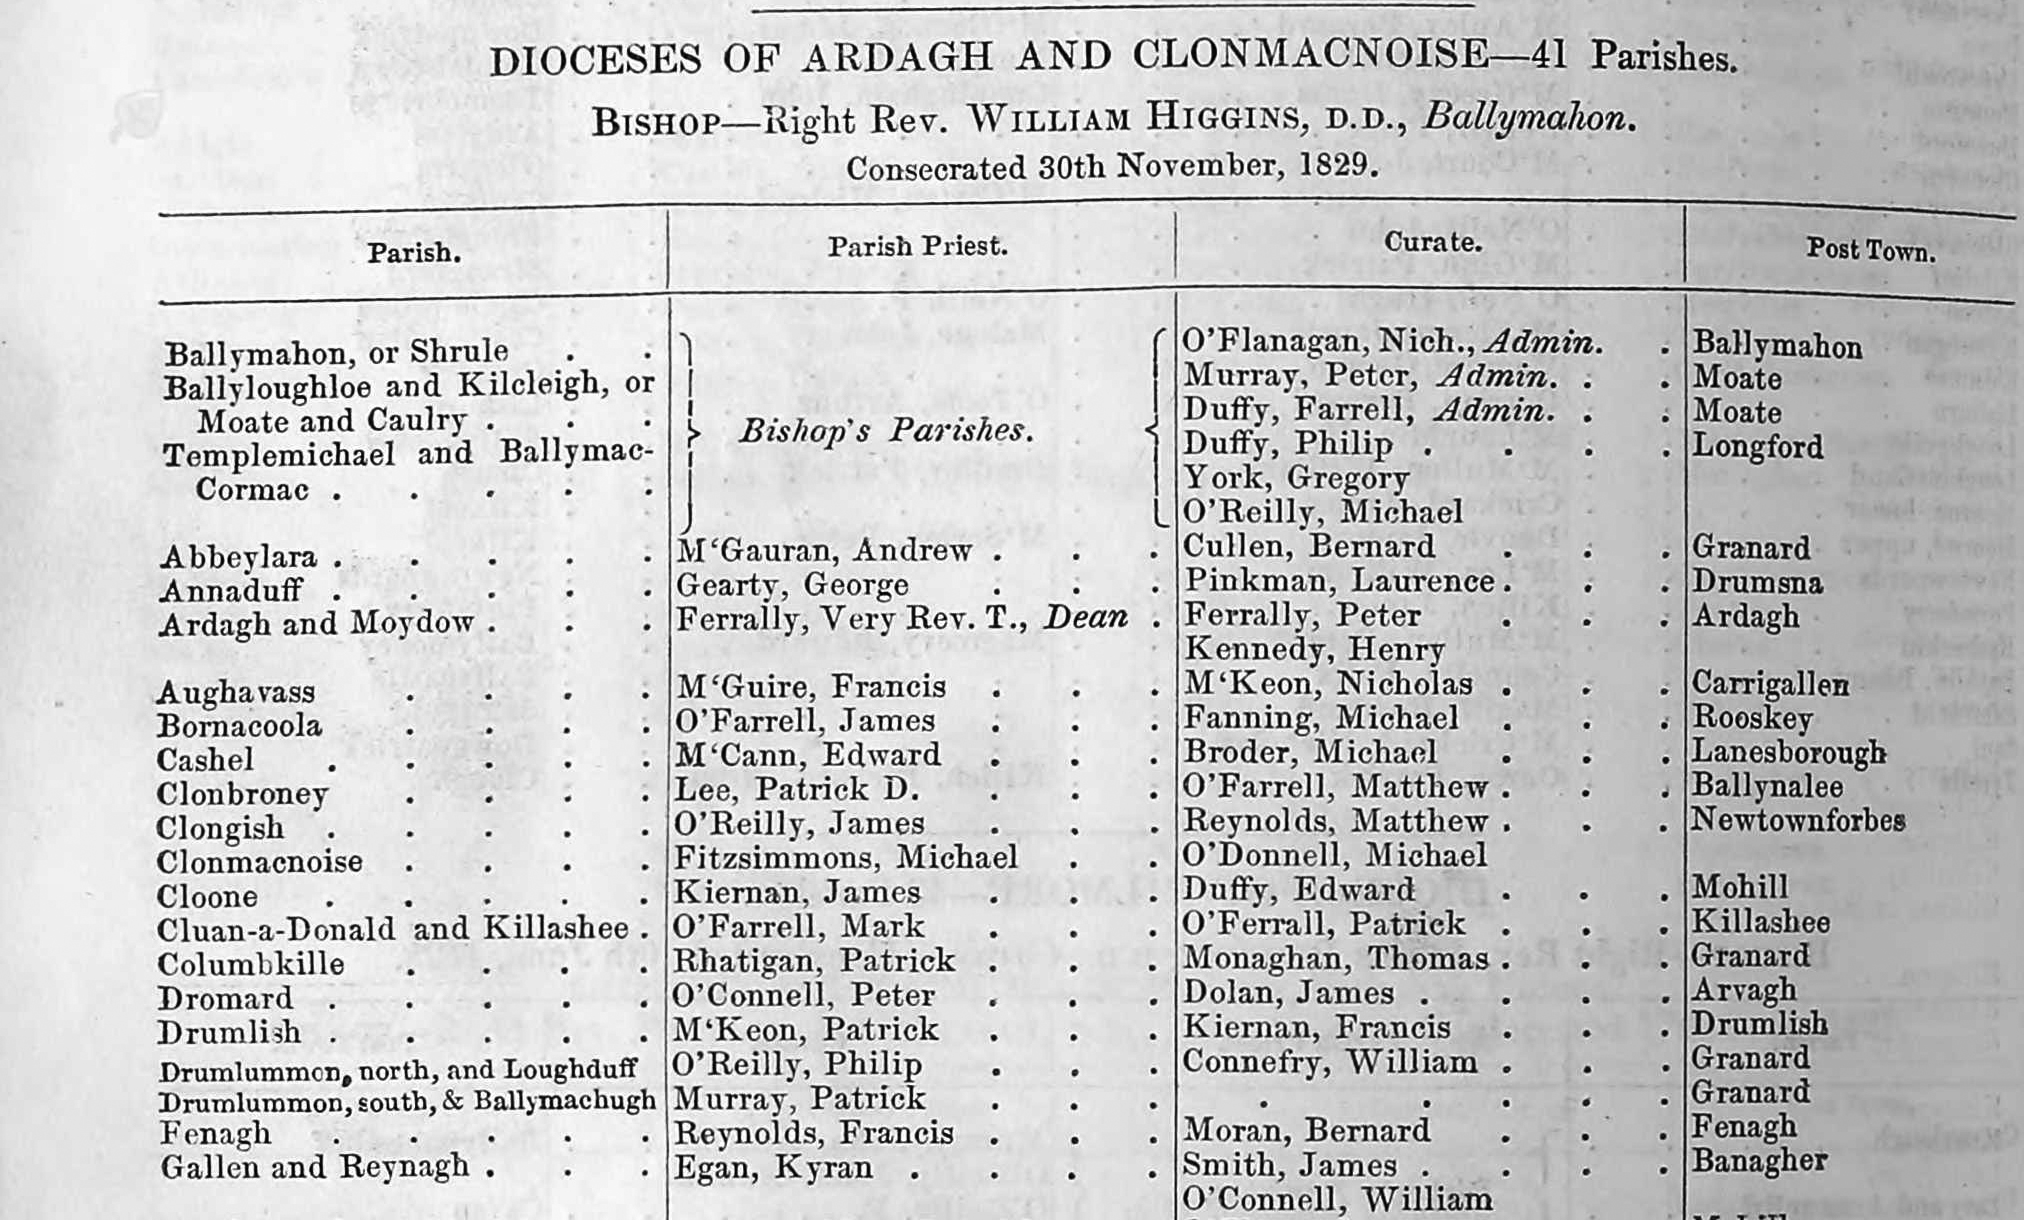 Dublin Directories and Almanacs genealogy and history in pdf ebooks on disc